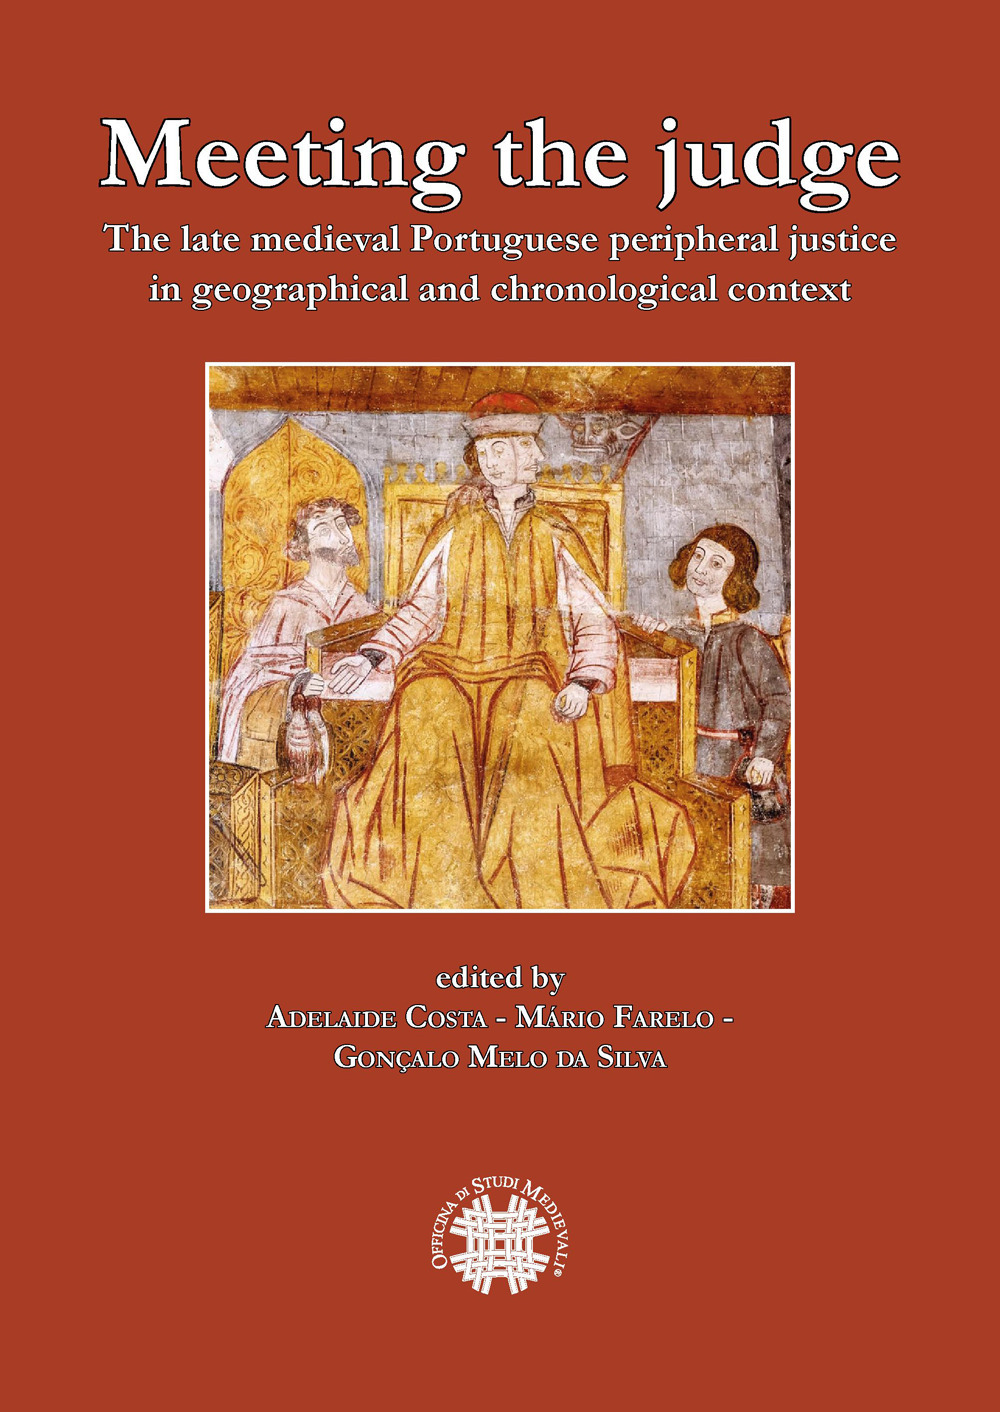 Meeting the judge. The late medieval Portuguese peripheral justice in geographical and chronogical context. Ediz. multilingue